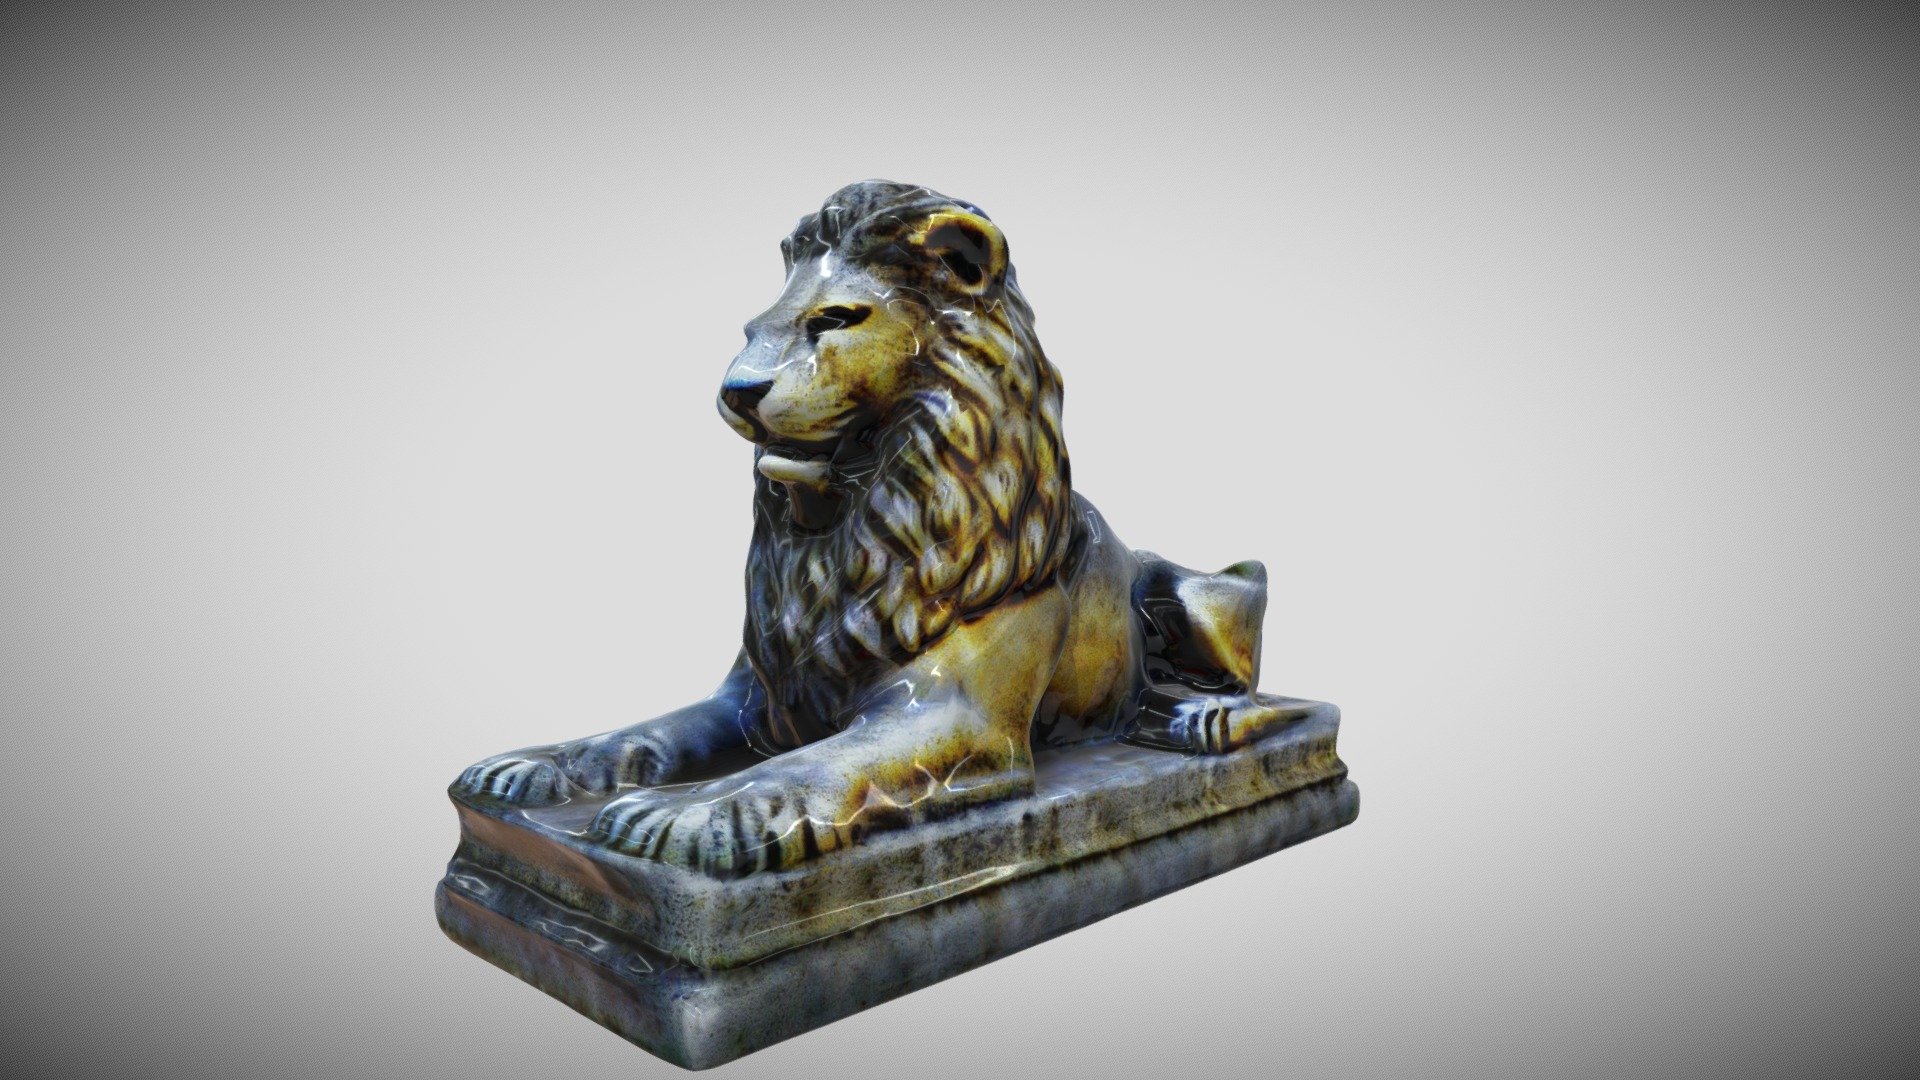 lion statue low poly game ready or for 3d print.
please take time to view my other work and follow me for more 3d model